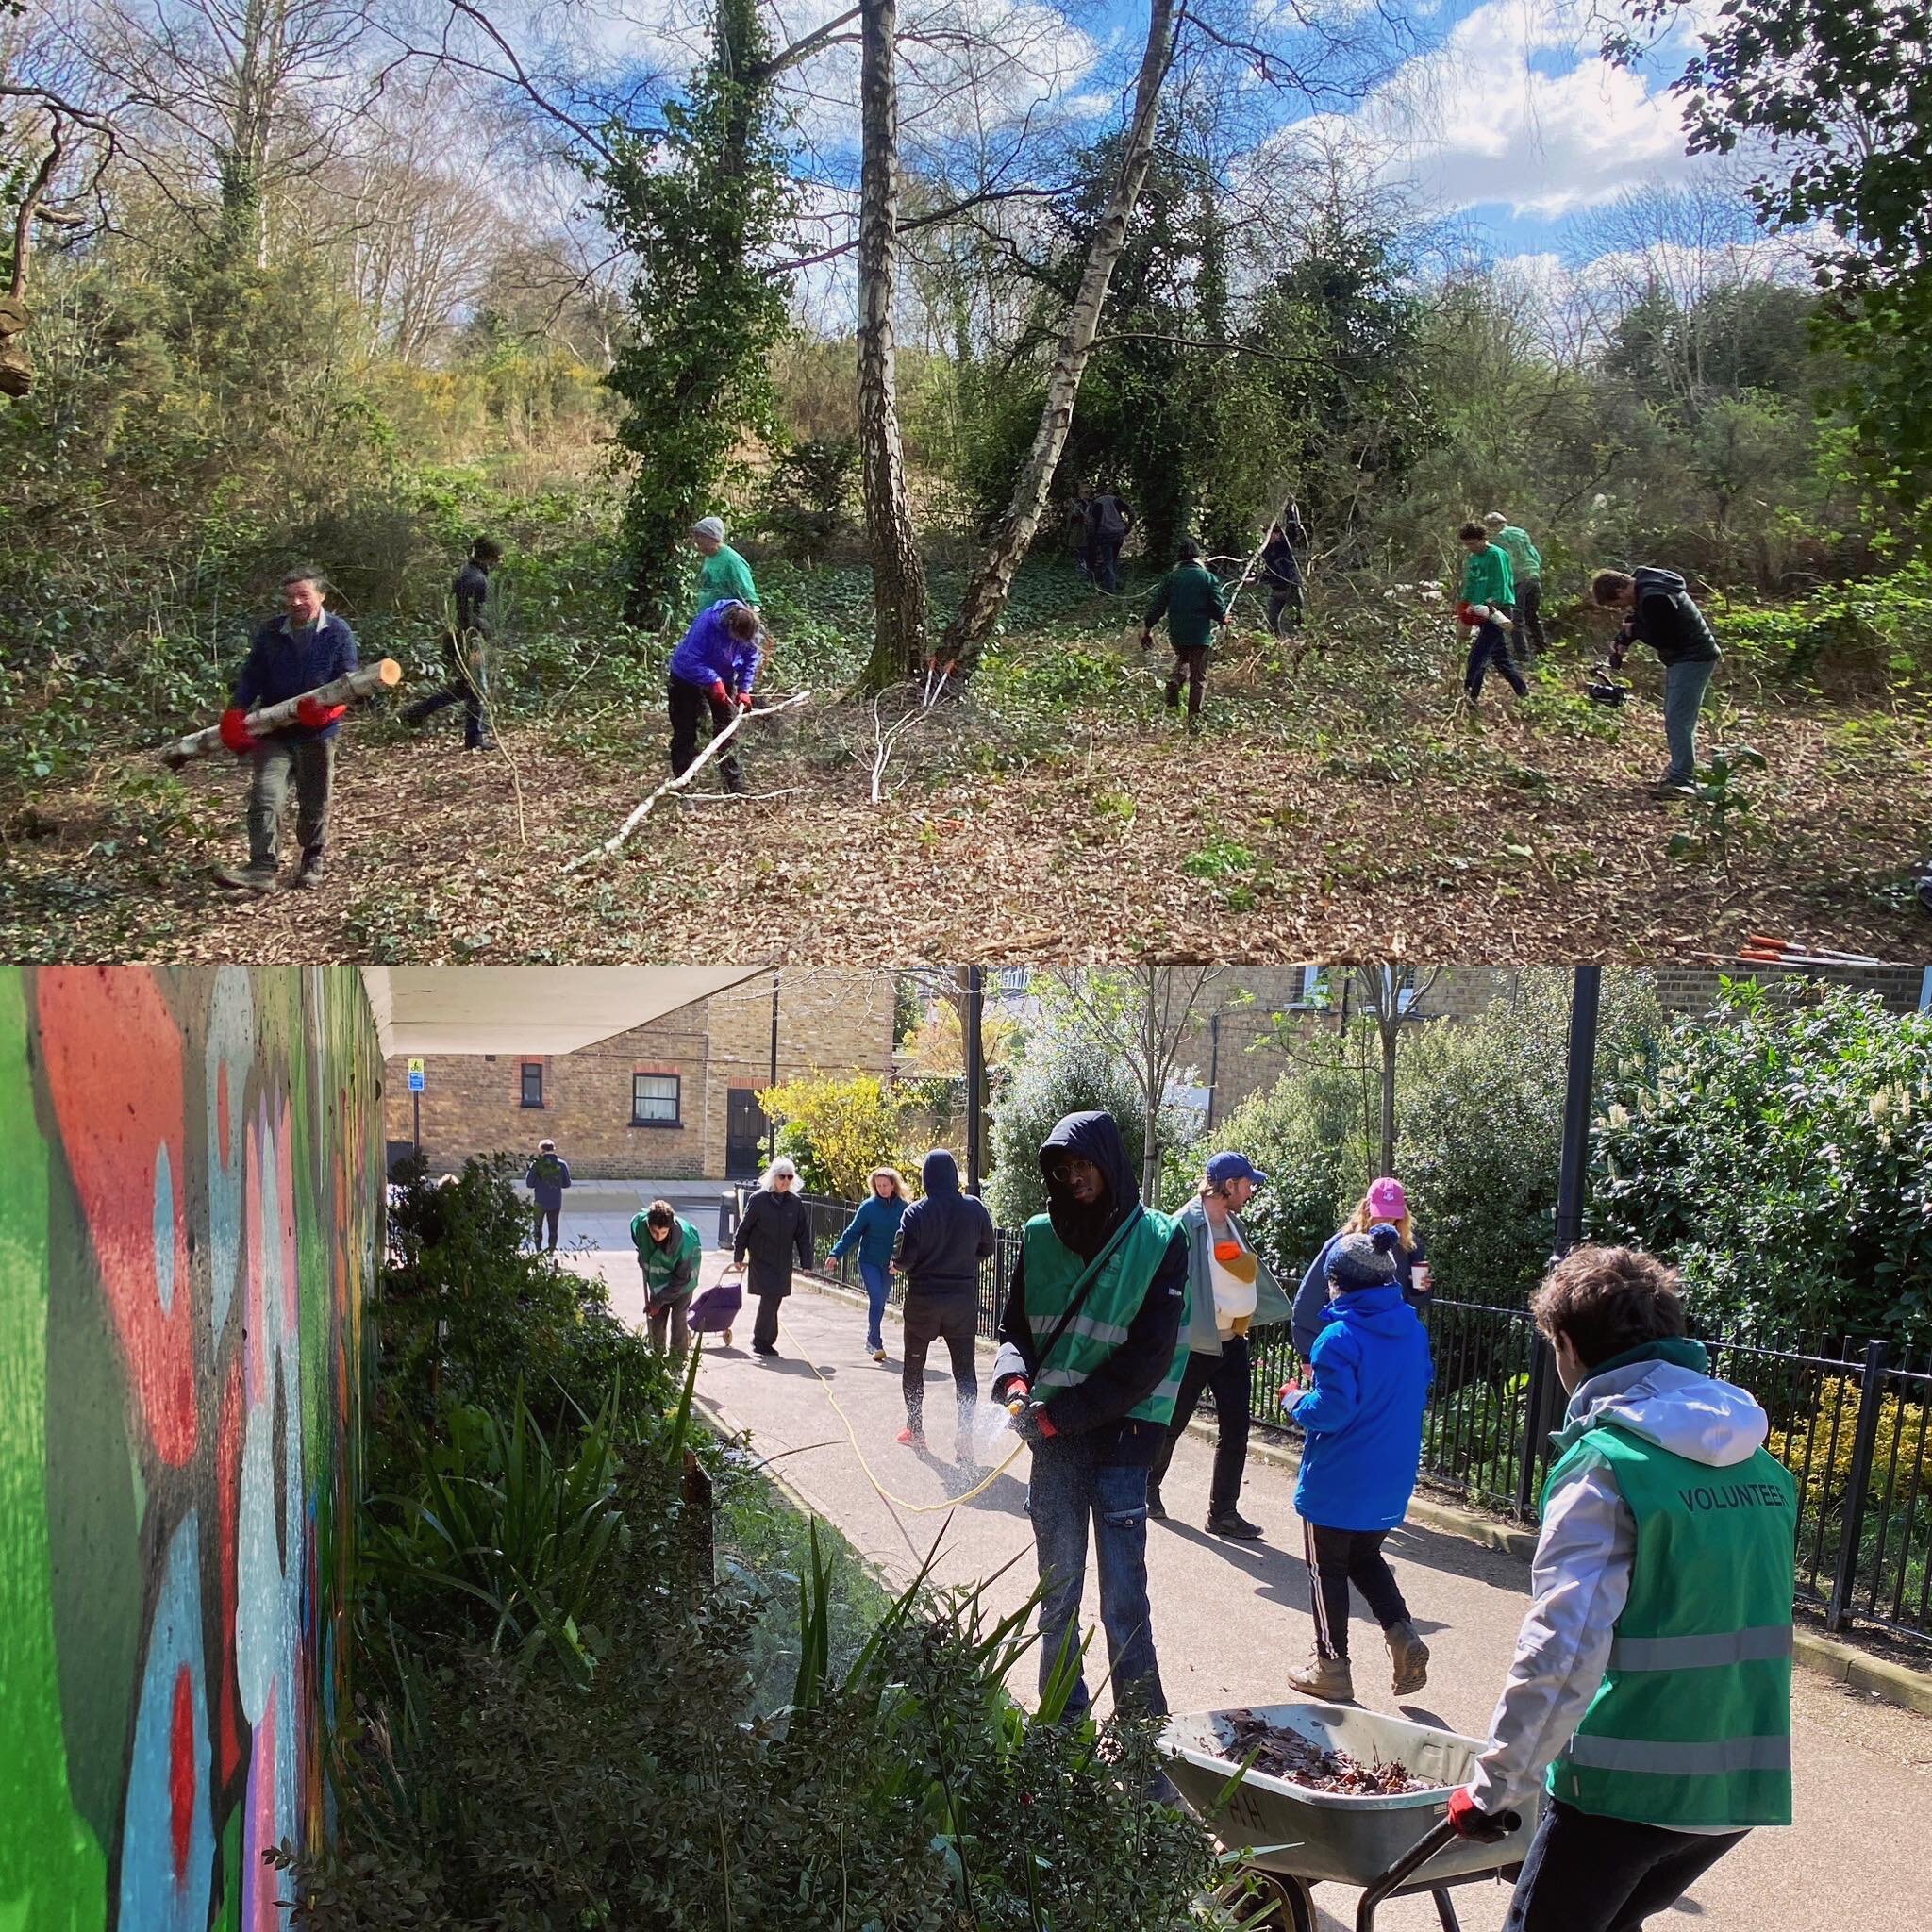 Always a pleasure checking with our fab conservation volunteers and today treated to both the adults and youth groups - working hard to keep the Heath tip top
.
.
#hampsteadheath #heathhands #environment #nature #conservation #wildlifeconservation #v